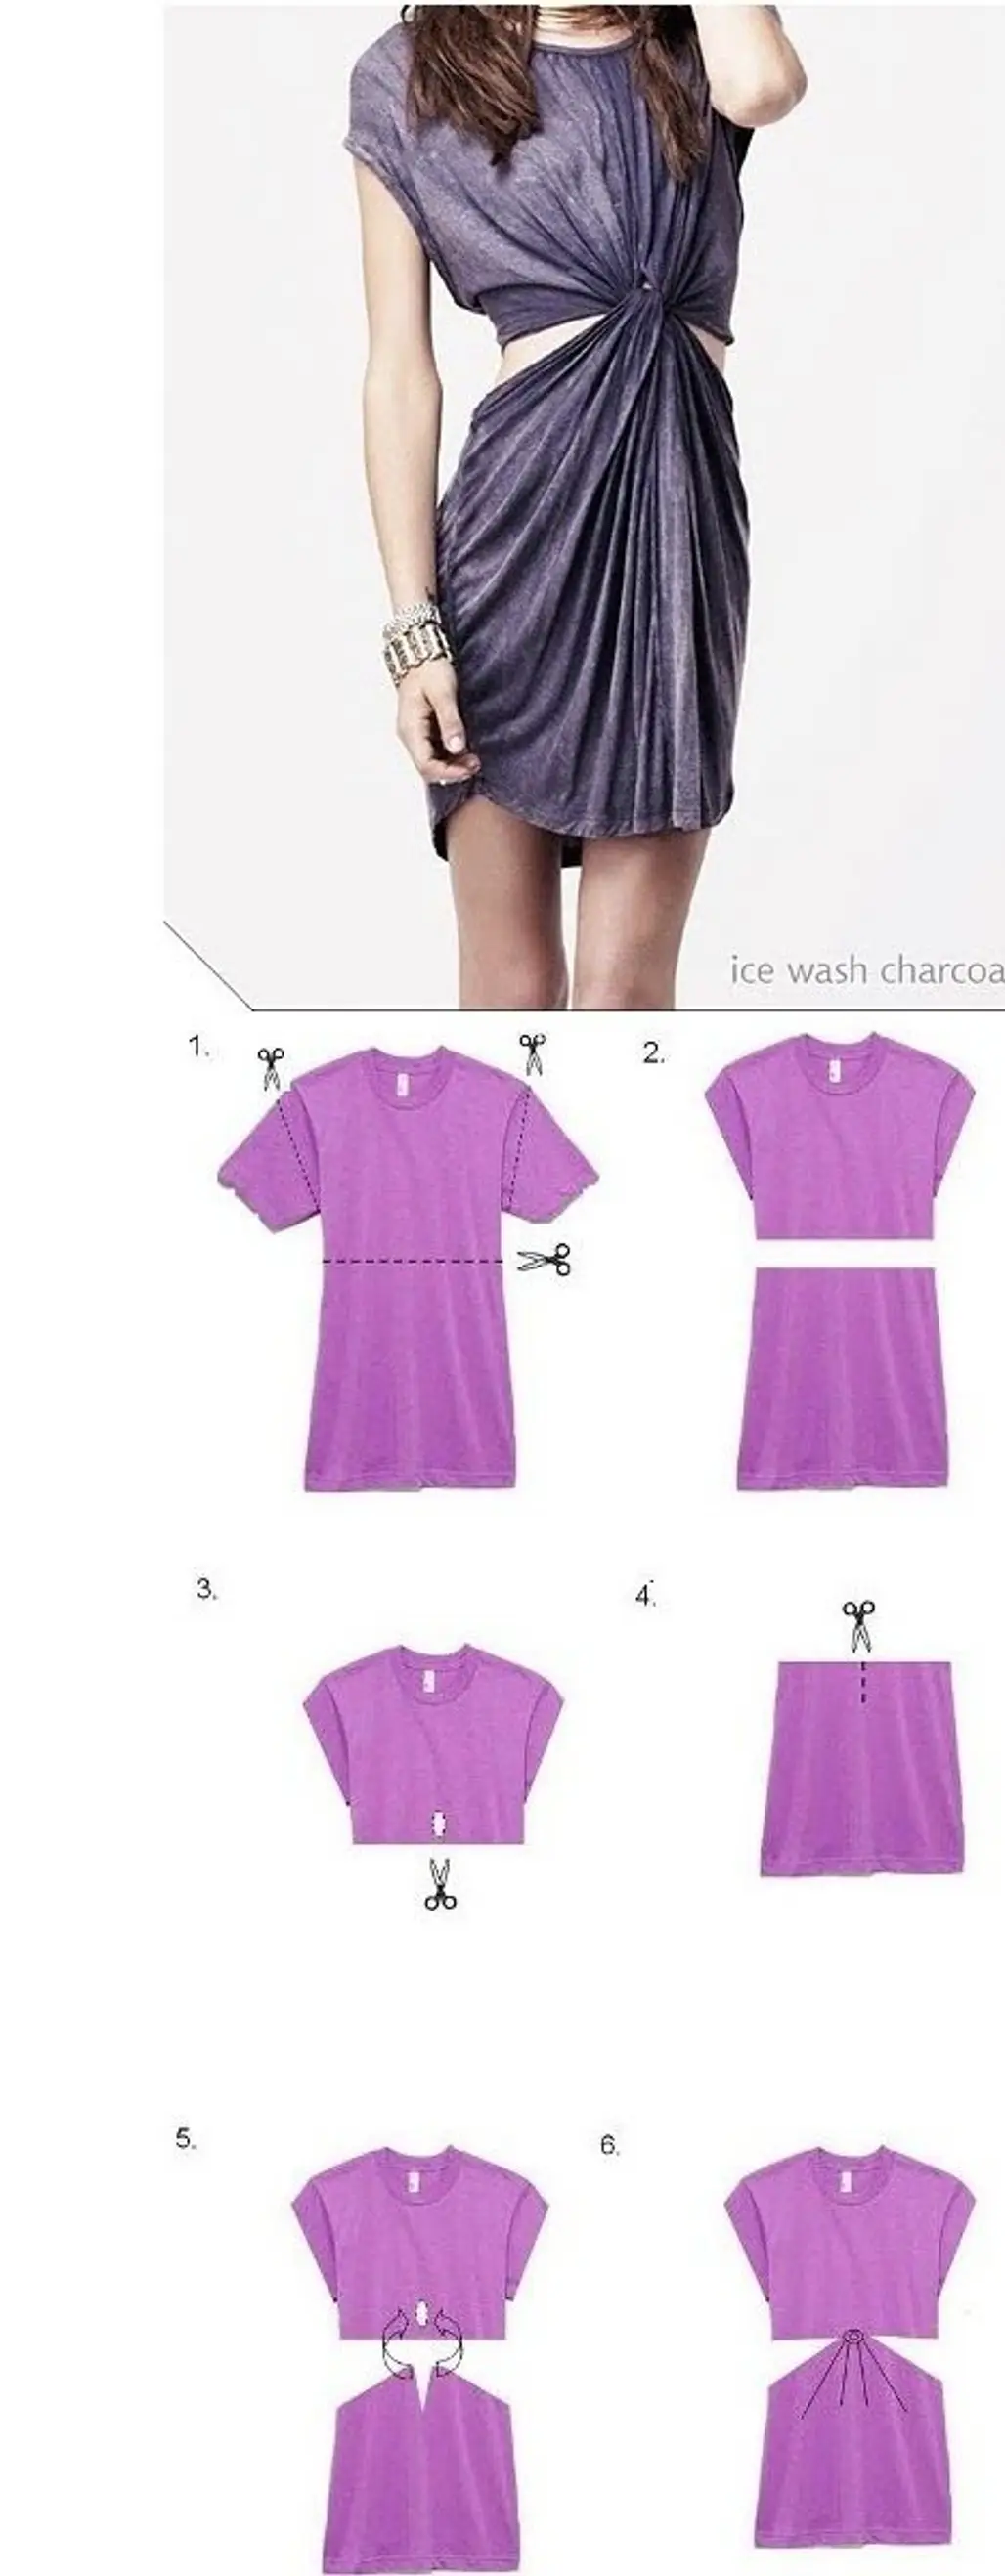 Give Your Old T-shirt Dress a New Look